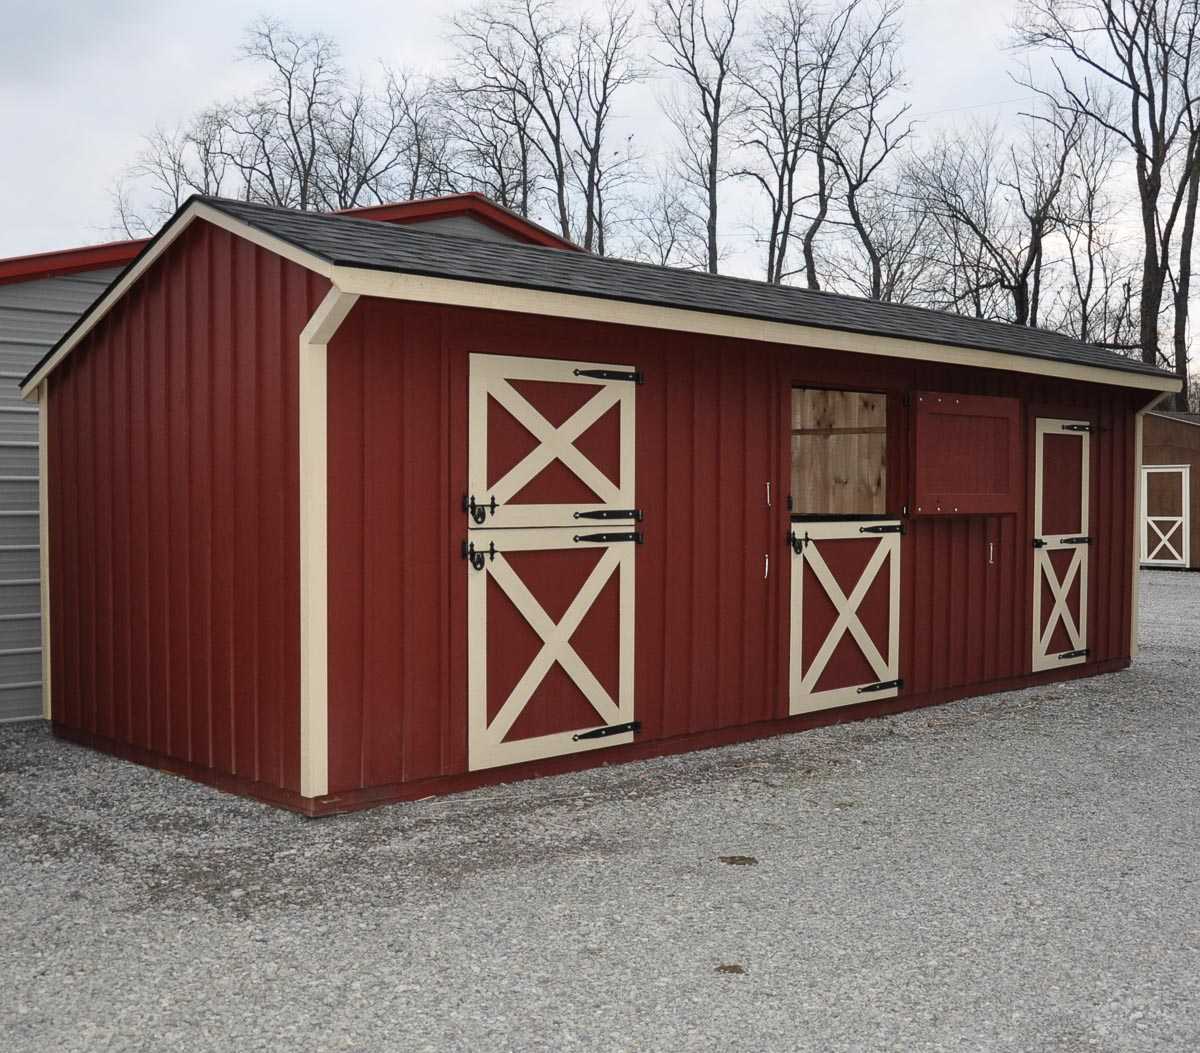 Horse Barns | Shed Row Horse Barns | Horse Shelter Sales in Ohio